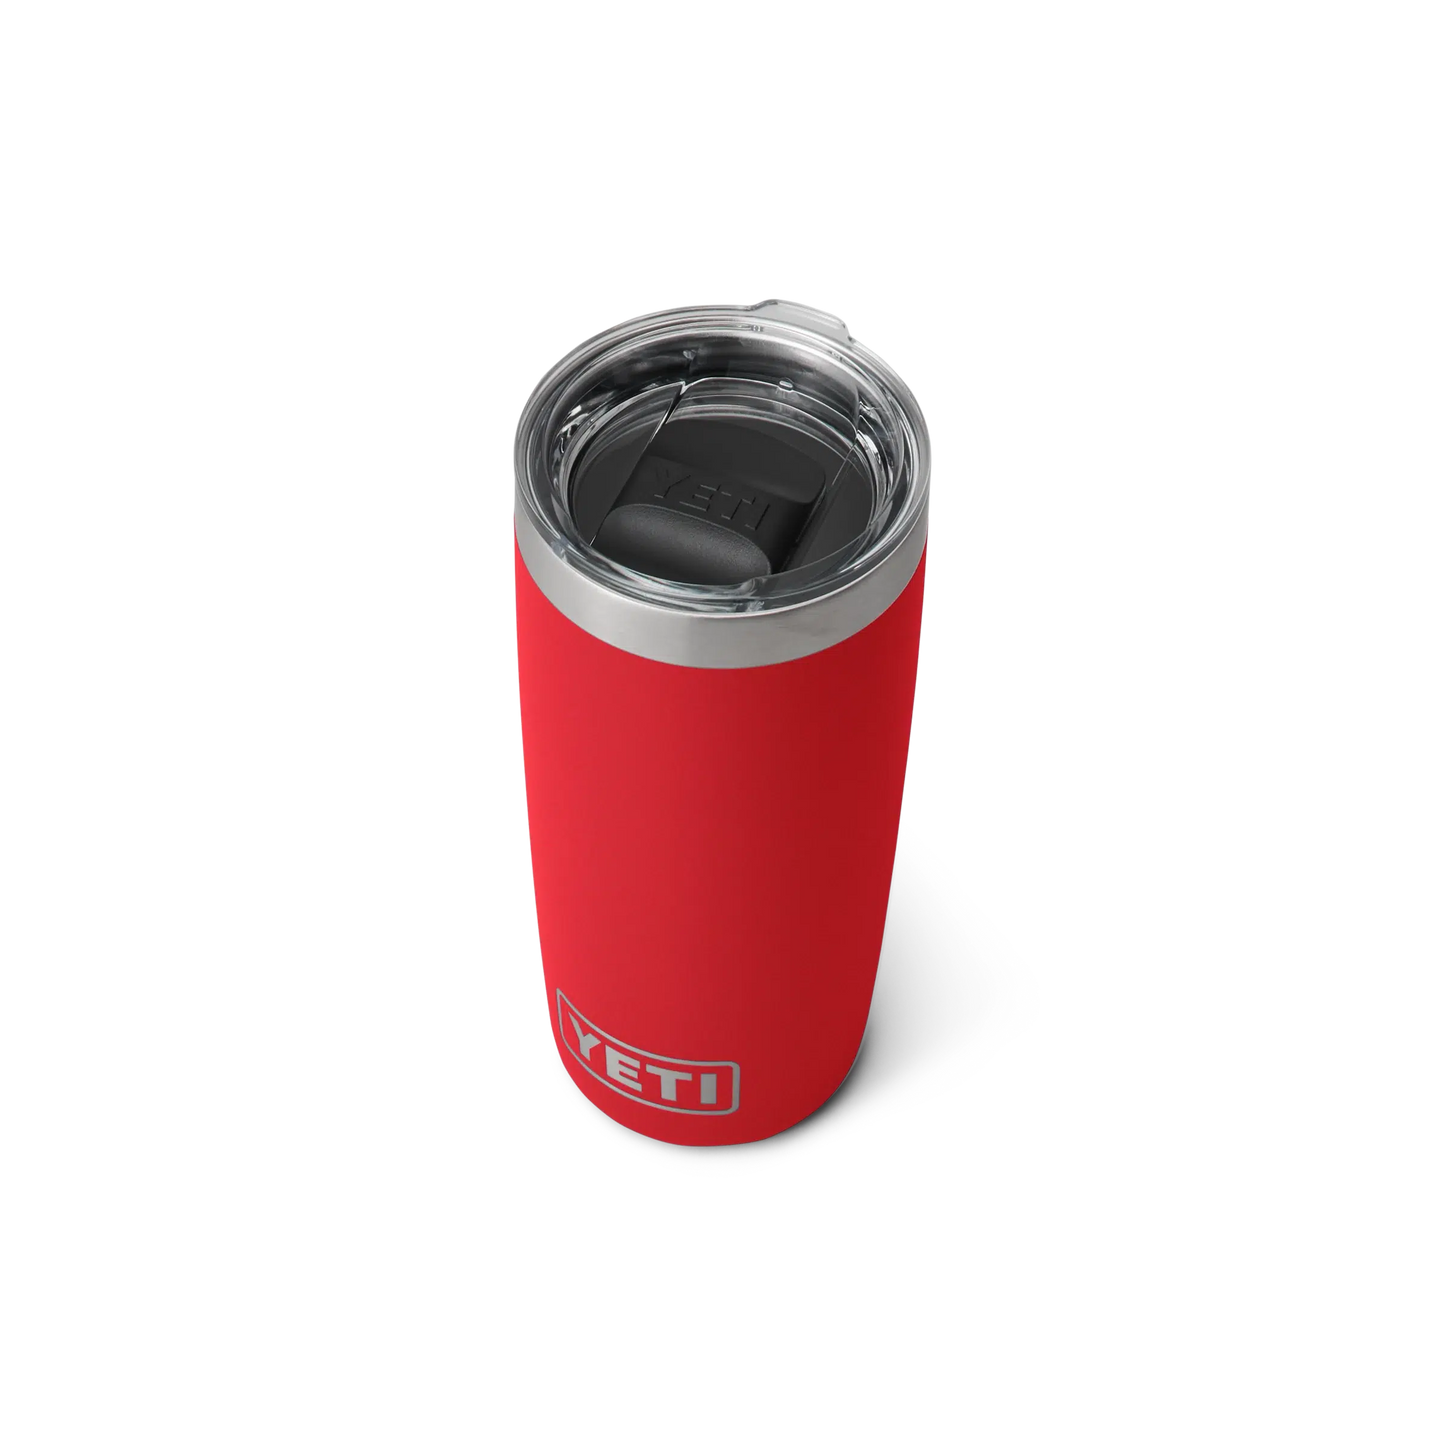 Yeti Tumbler 10oz (295ml) with Magslider Lid-Coolers & Drinkware-Yeti-Rescue Red-Fishing Station